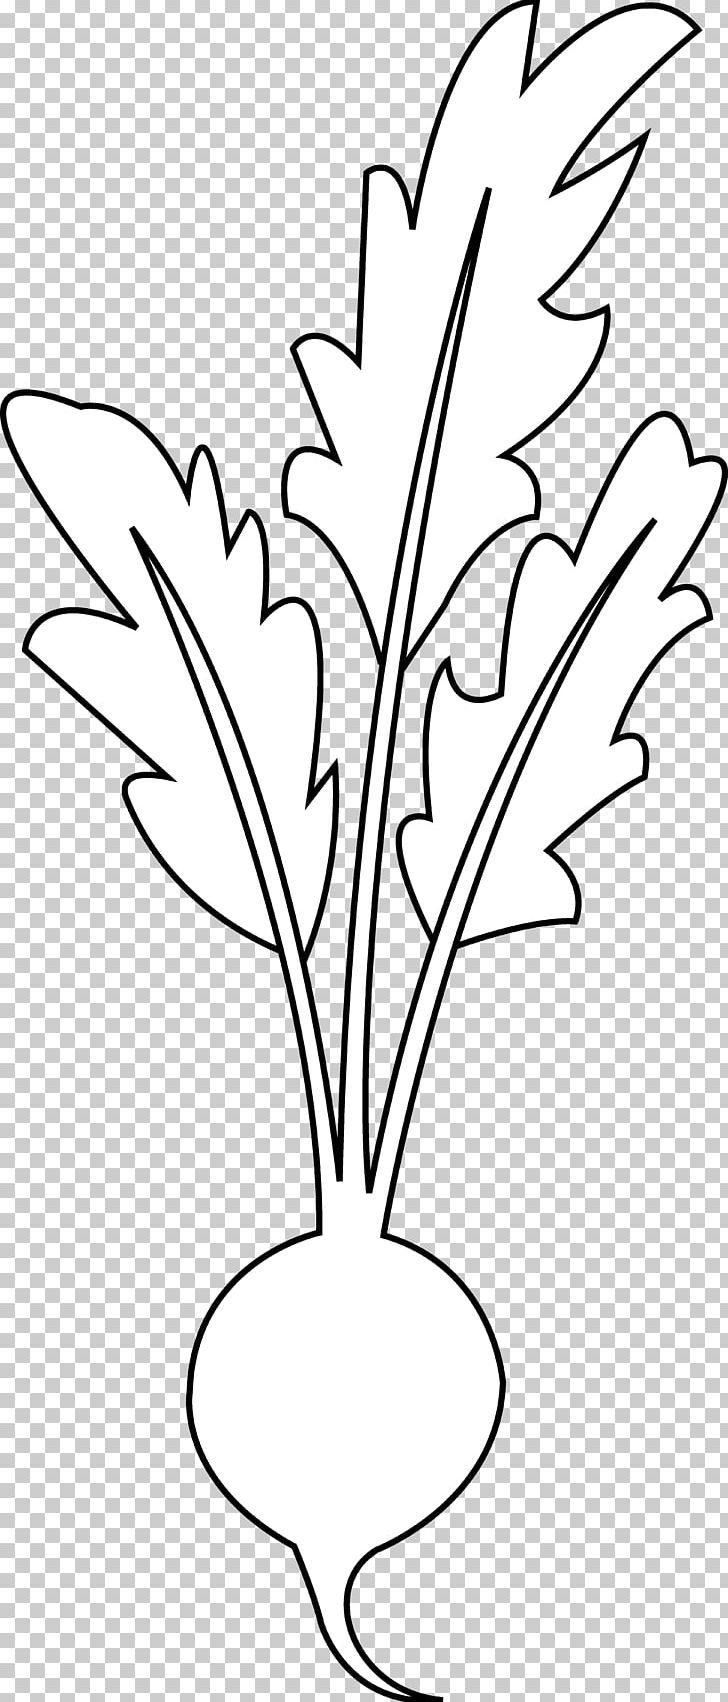 Beetroot Line Art Vegetable Black And White PNG, Clipart, Beet, Beetroot, Black And White, Branch, Cartoon Free PNG Download